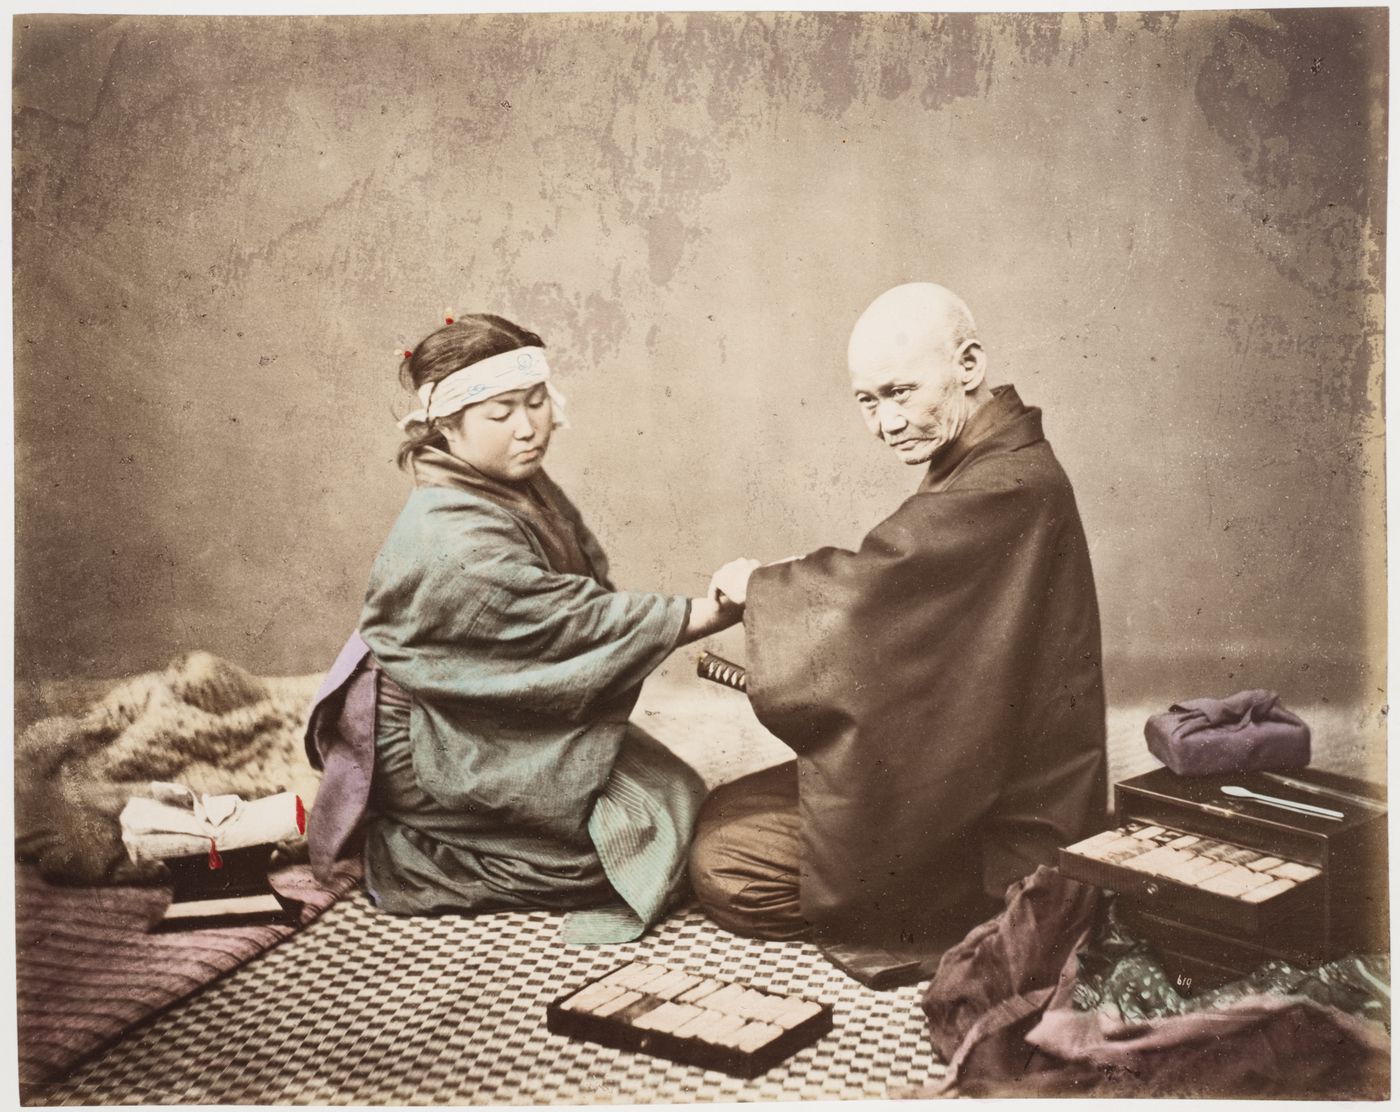 Group portrait of a patient and a physician, Japan